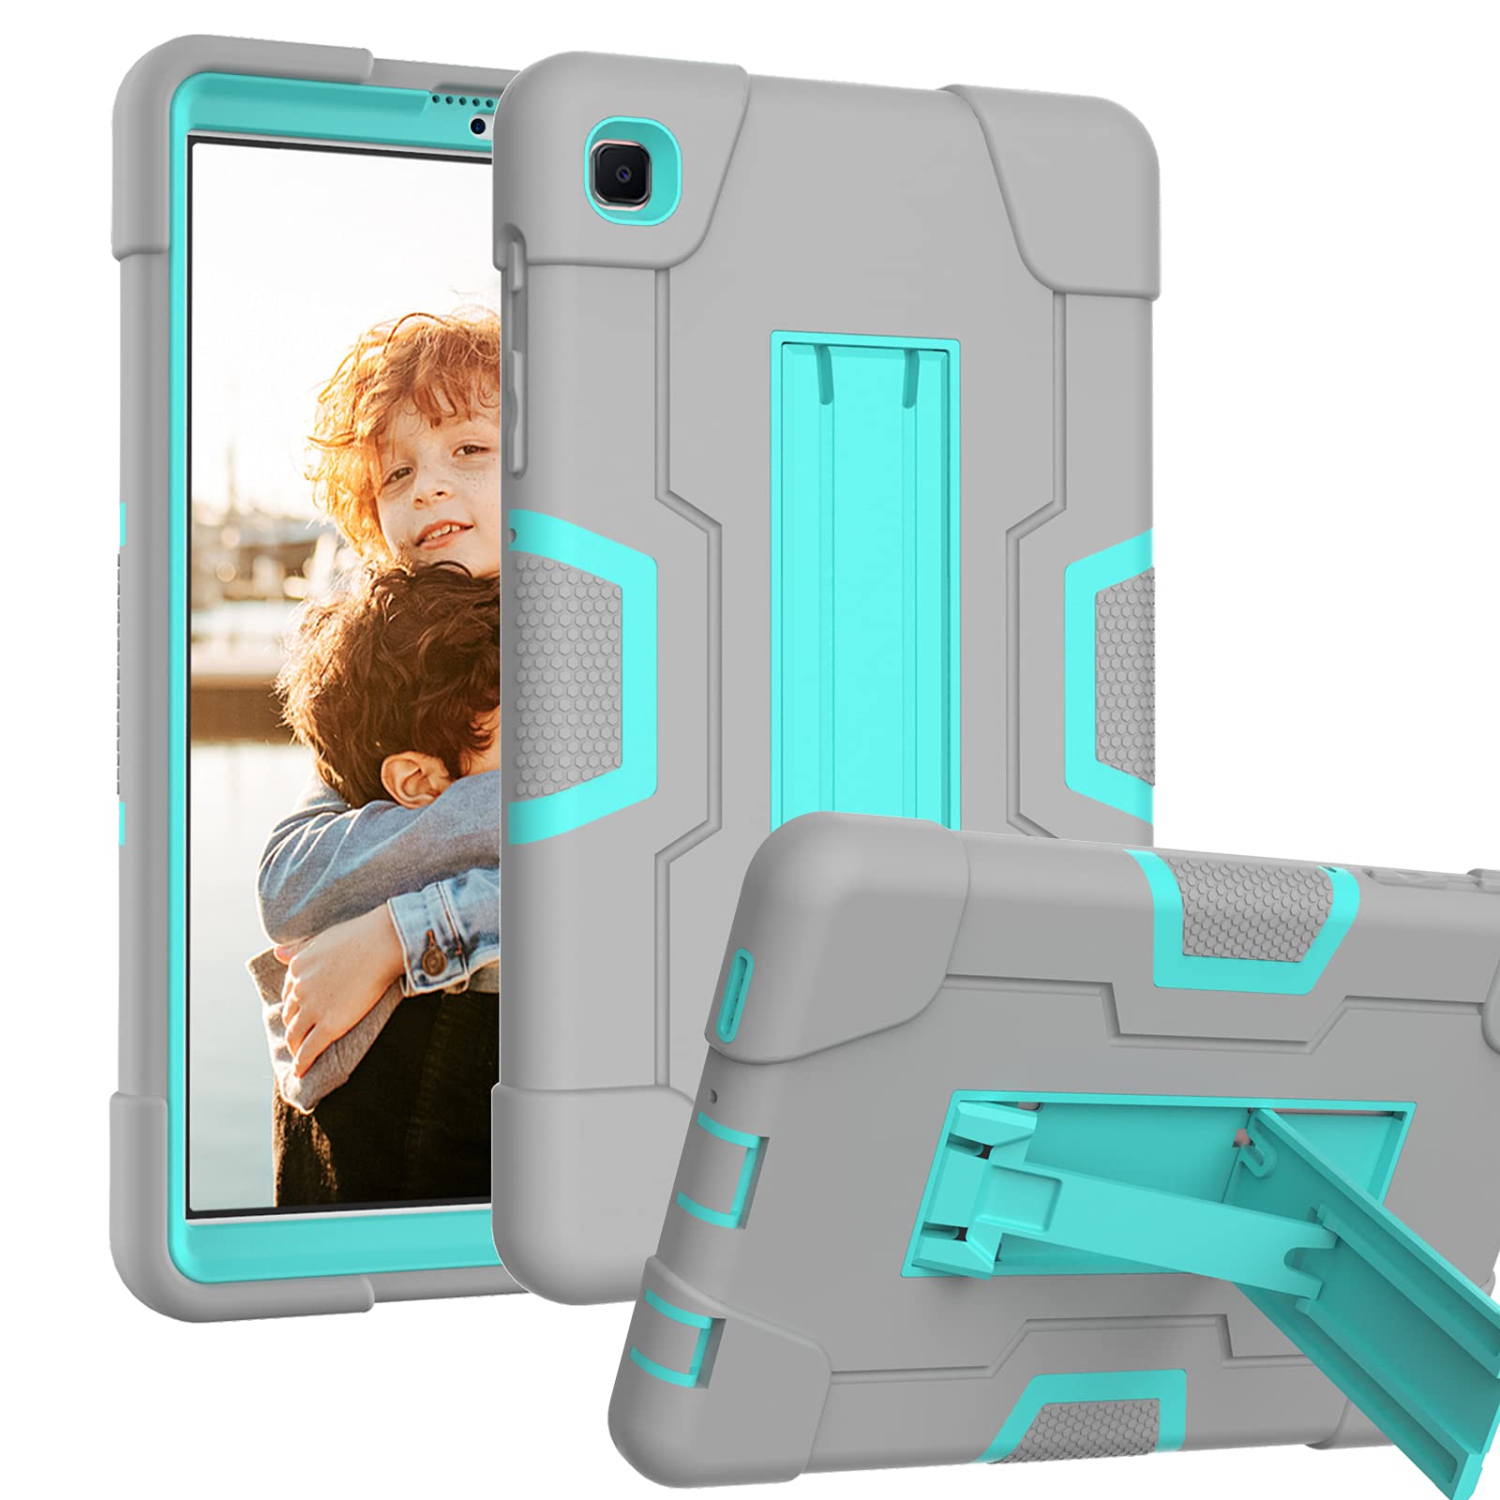 HAII Case for Samsung Galaxy Tab A7 Lite T220/T225, Full Body Rugged Kids Case with Kickstand Heavy Duty Shockproof Drop-Pro